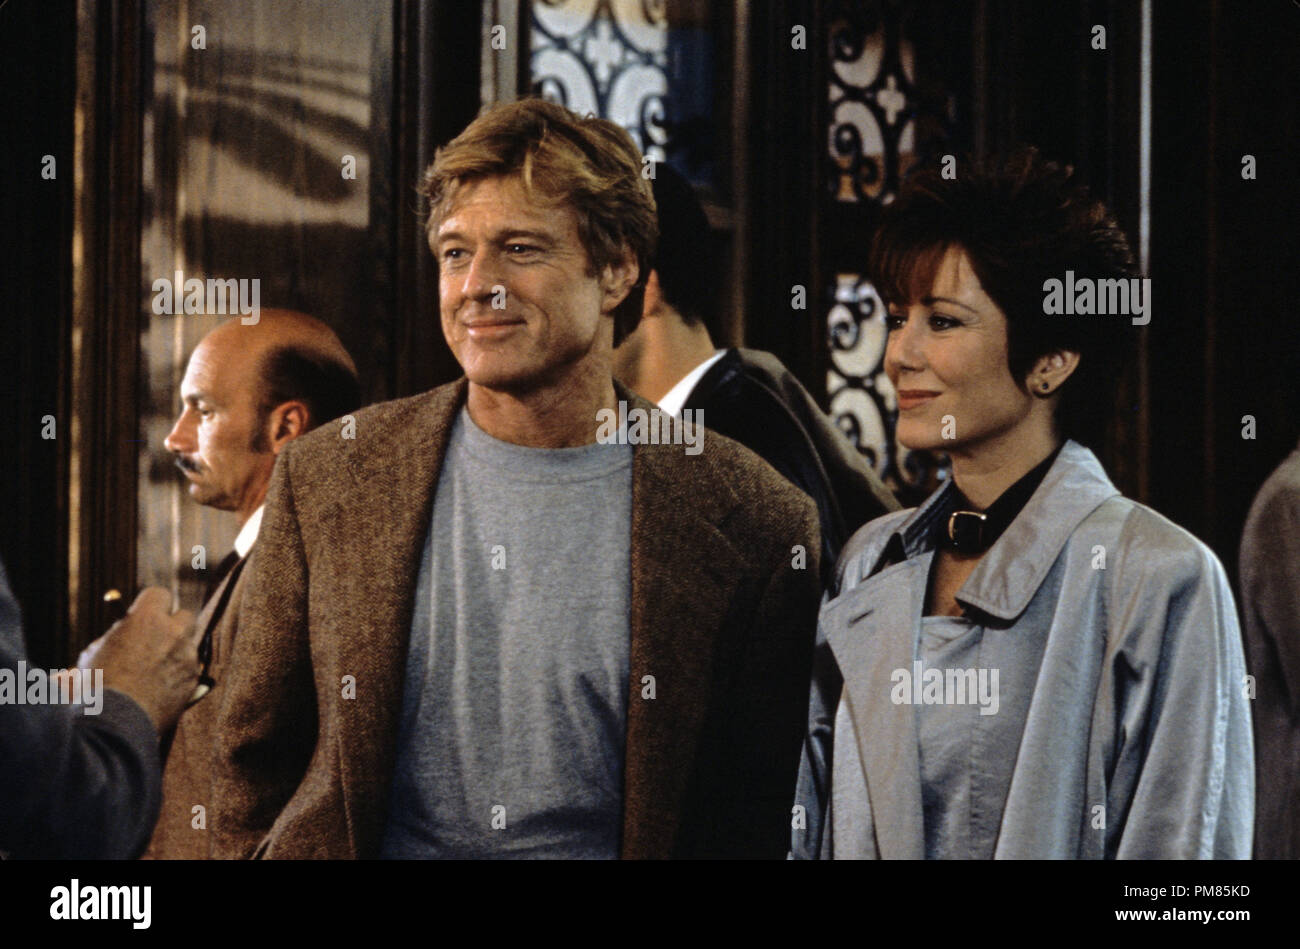 film still or publicity still from sneakers robert redford mary mcdonnell 1992 universal pictures photo credit melinda sue gordon all rights reserved file reference 31487 268tha for editorial use only PM85KD